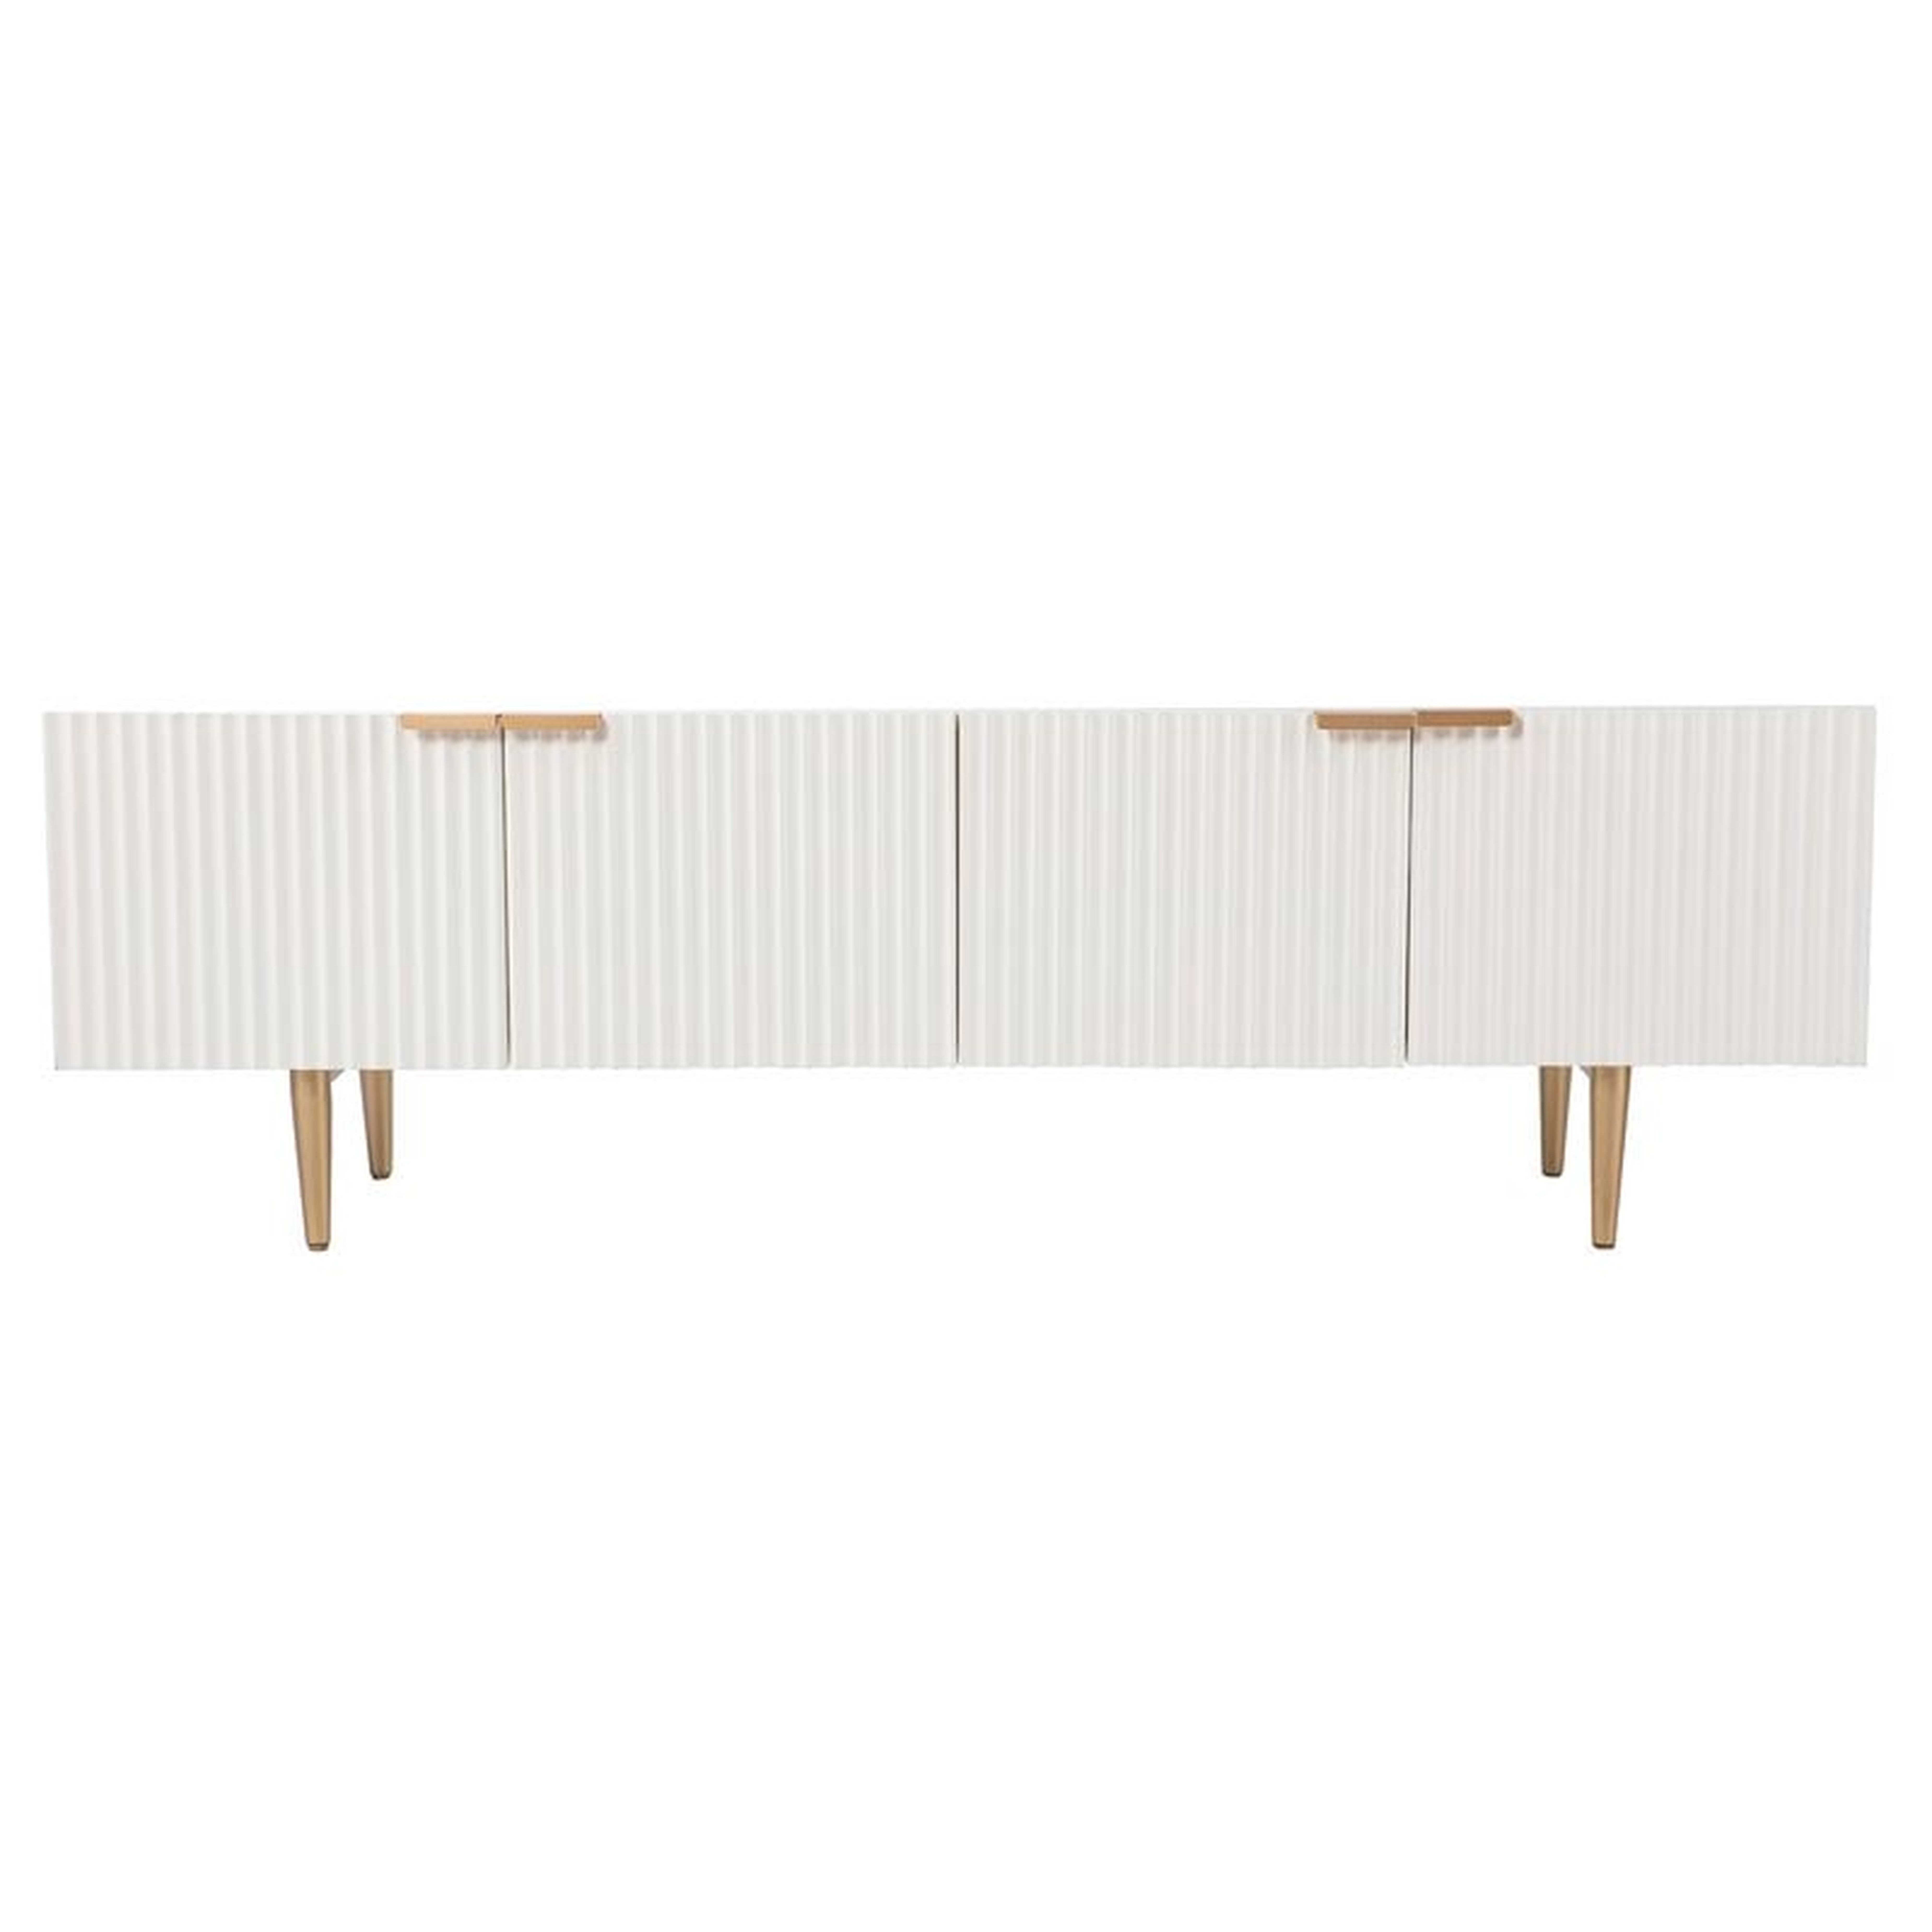 Pilston TV Stand for TVs up to 58", White & Gold - Wayfair